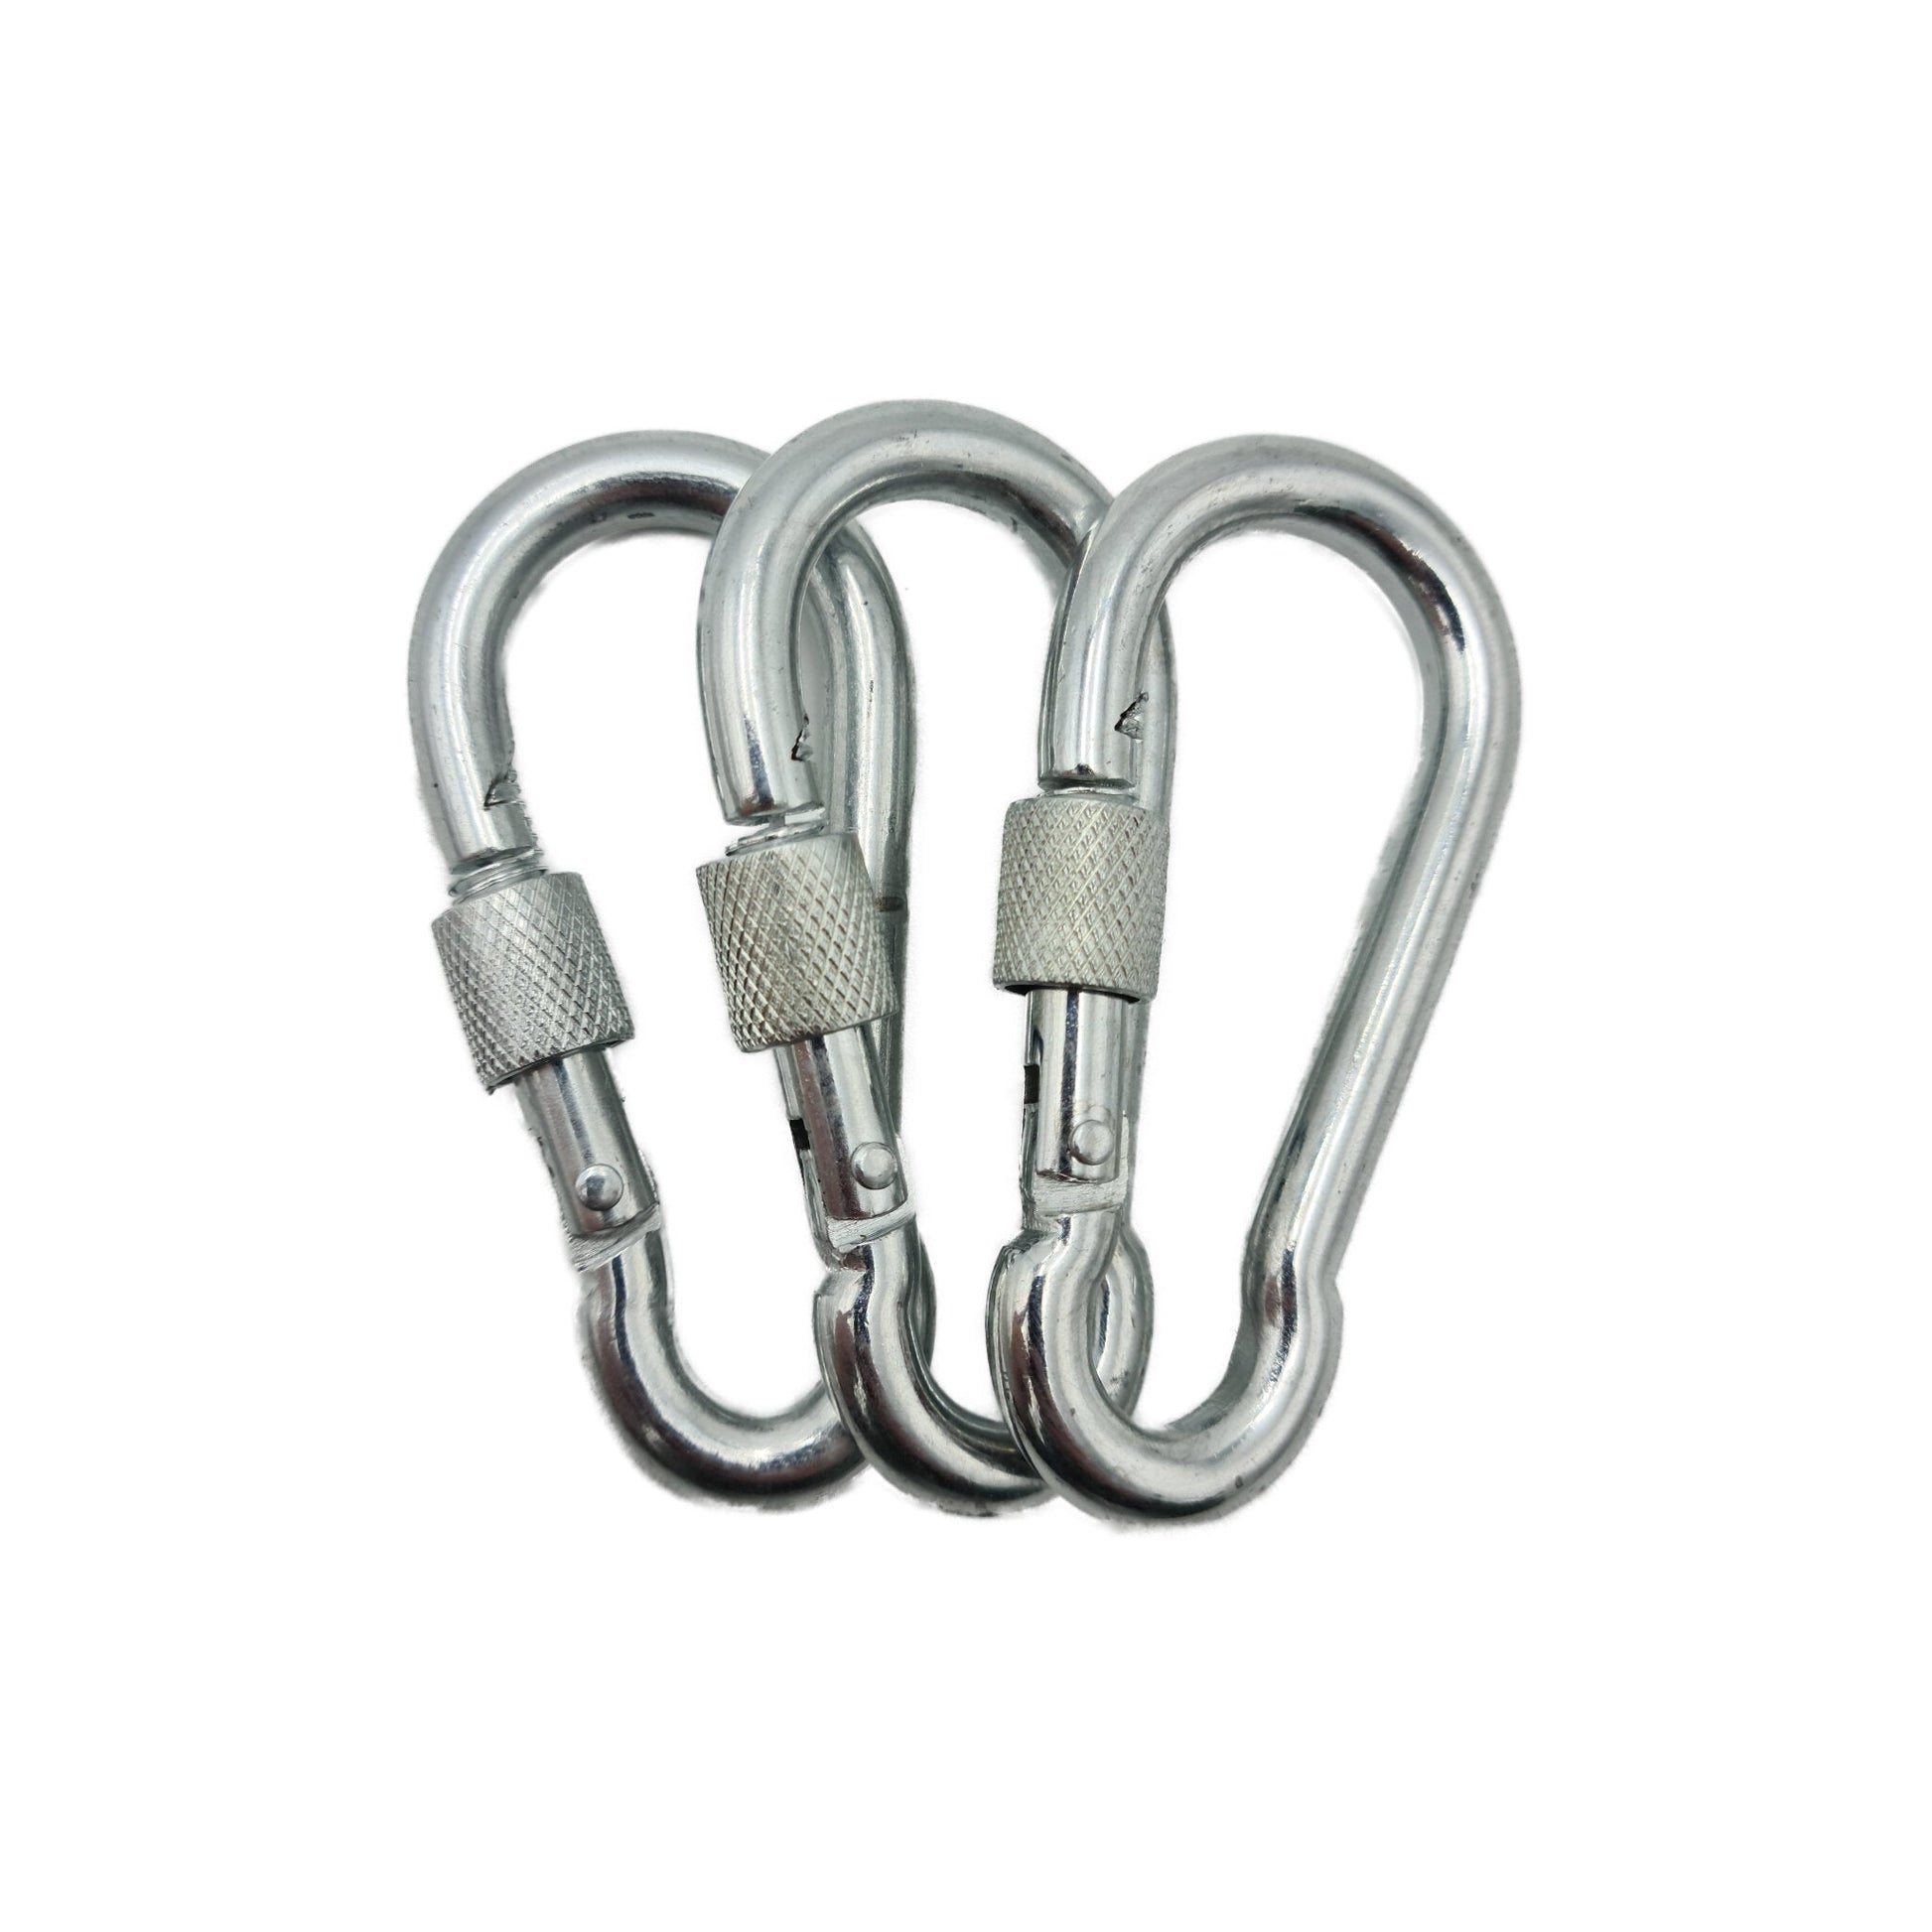 Triple Carabiners for Magnet Fishing